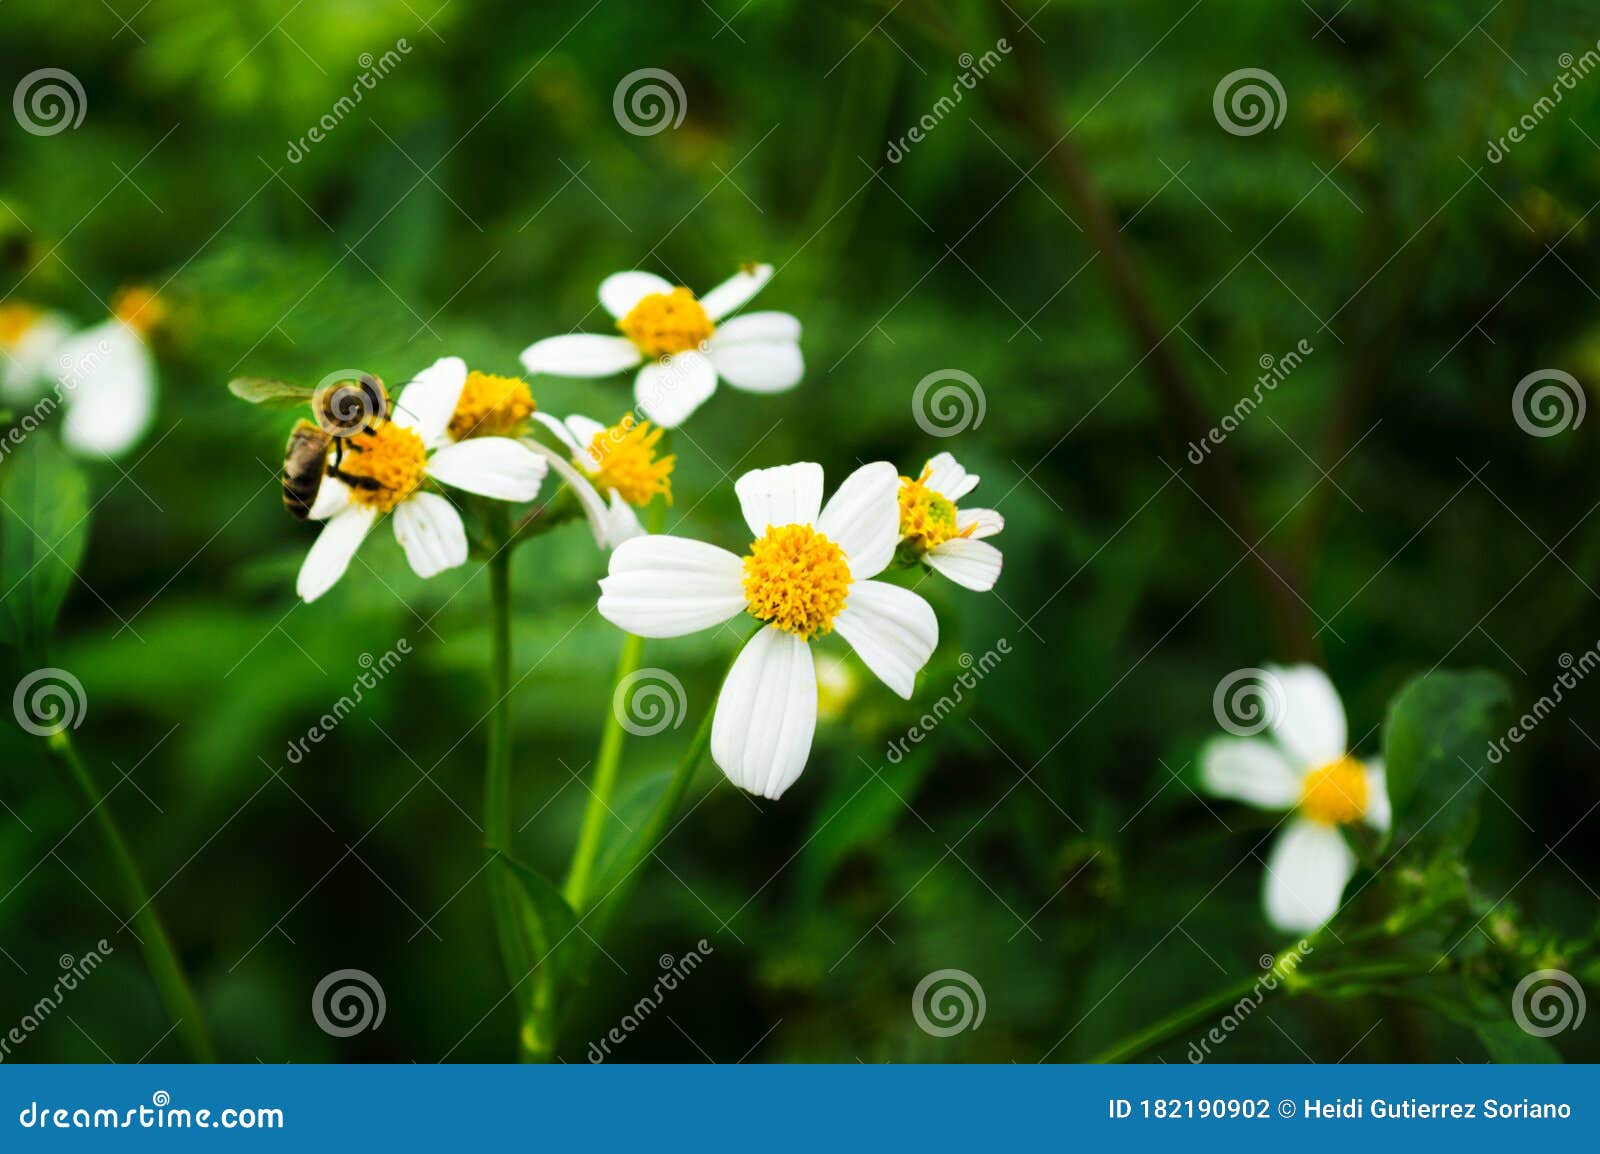 white weed flowers with a bee - daisy lookalikes